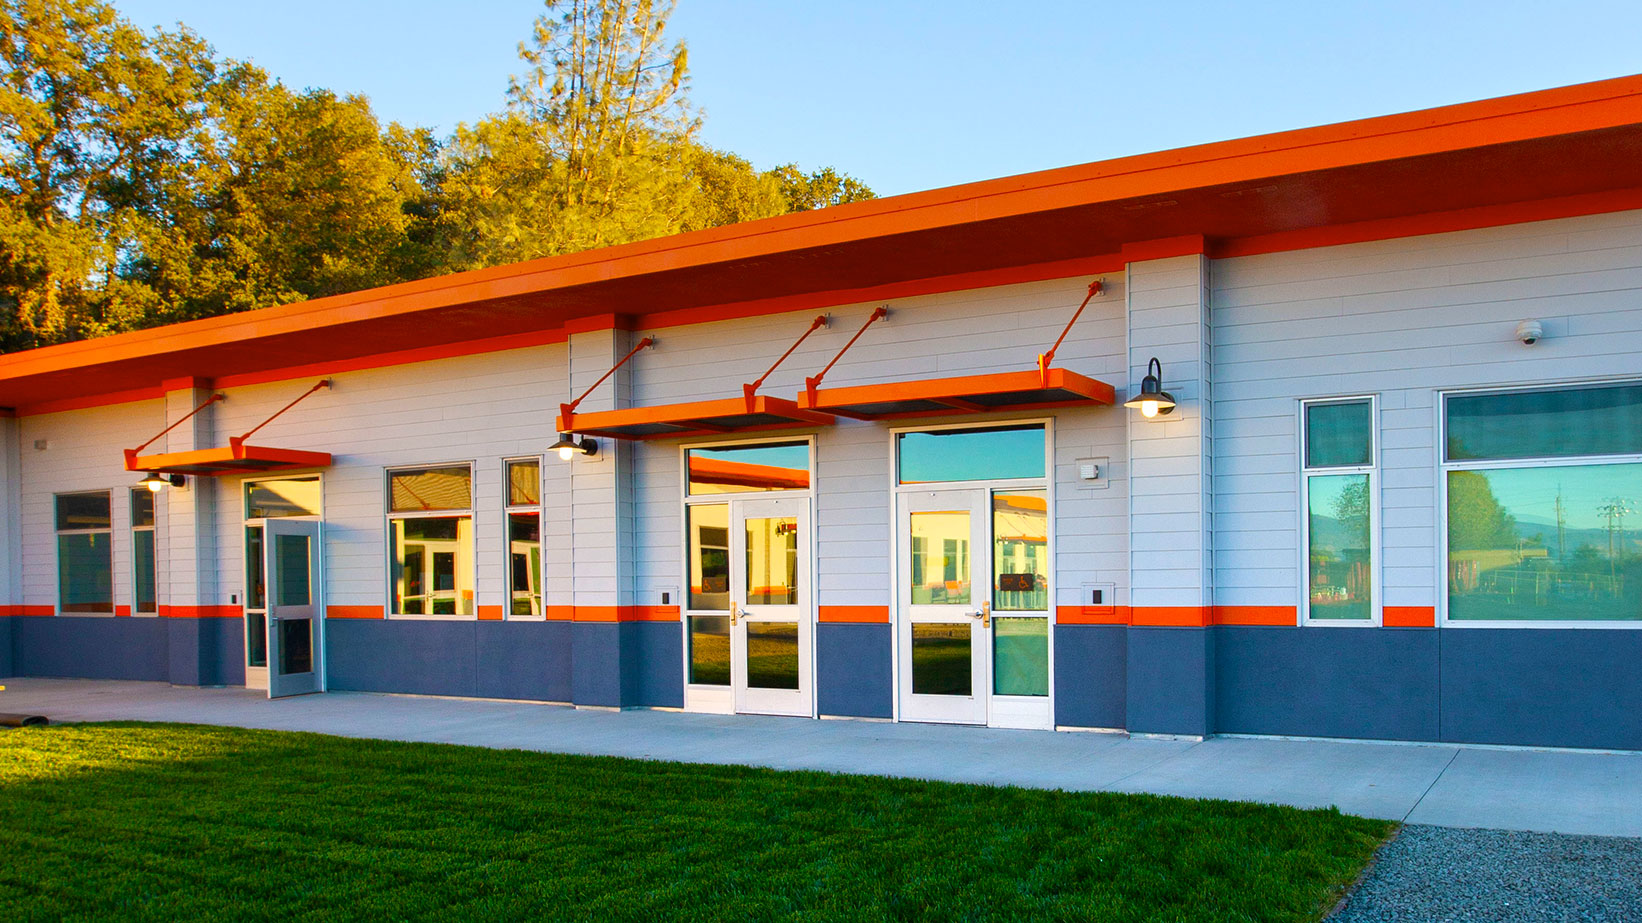 Closeup of two classroom entrances, with orange overhangs over doors, and reflective glass in doors and windows.